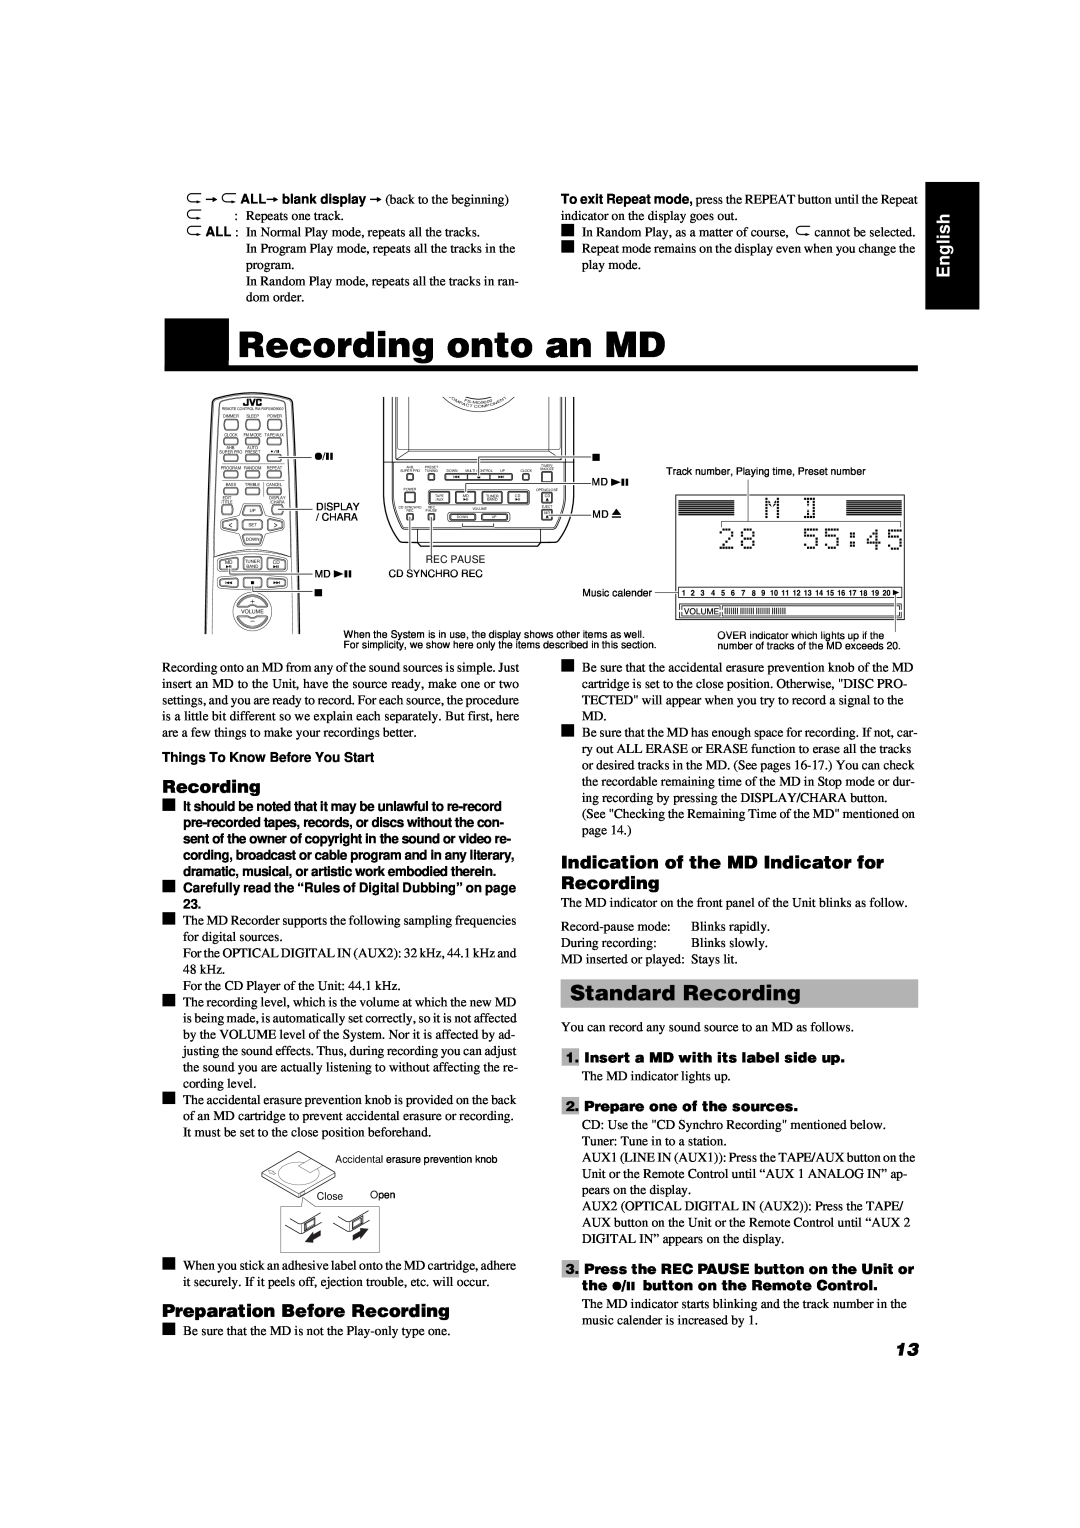 JVC FS-MD9000 manual Recording onto an MD, Standard Recording, Indication of the MD Indicator for Recording, English 